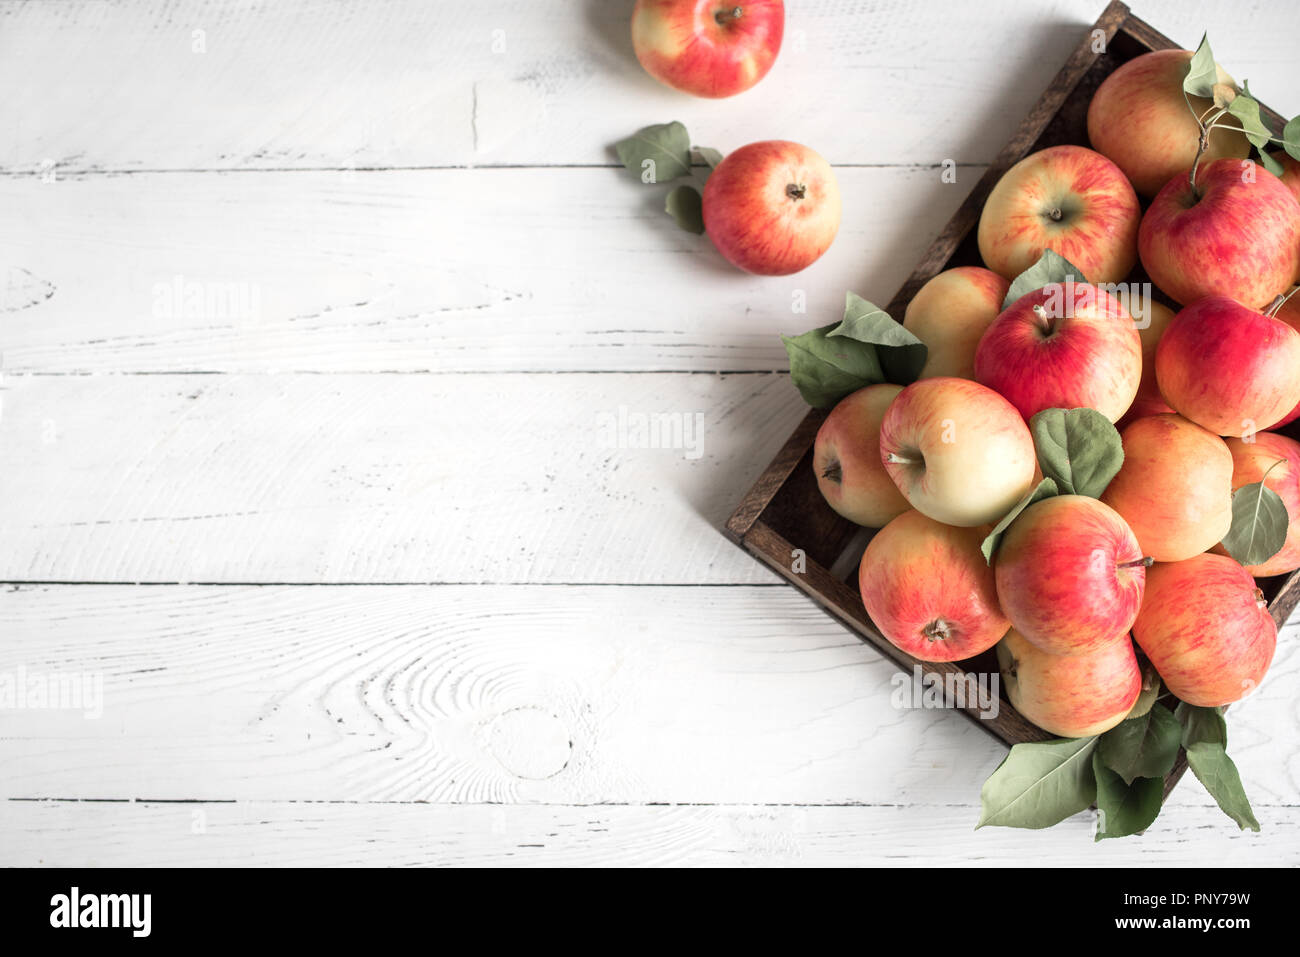 Red apples in wooden box. Organic red apples with leaves on white wooden background, copy space. Stock Photo